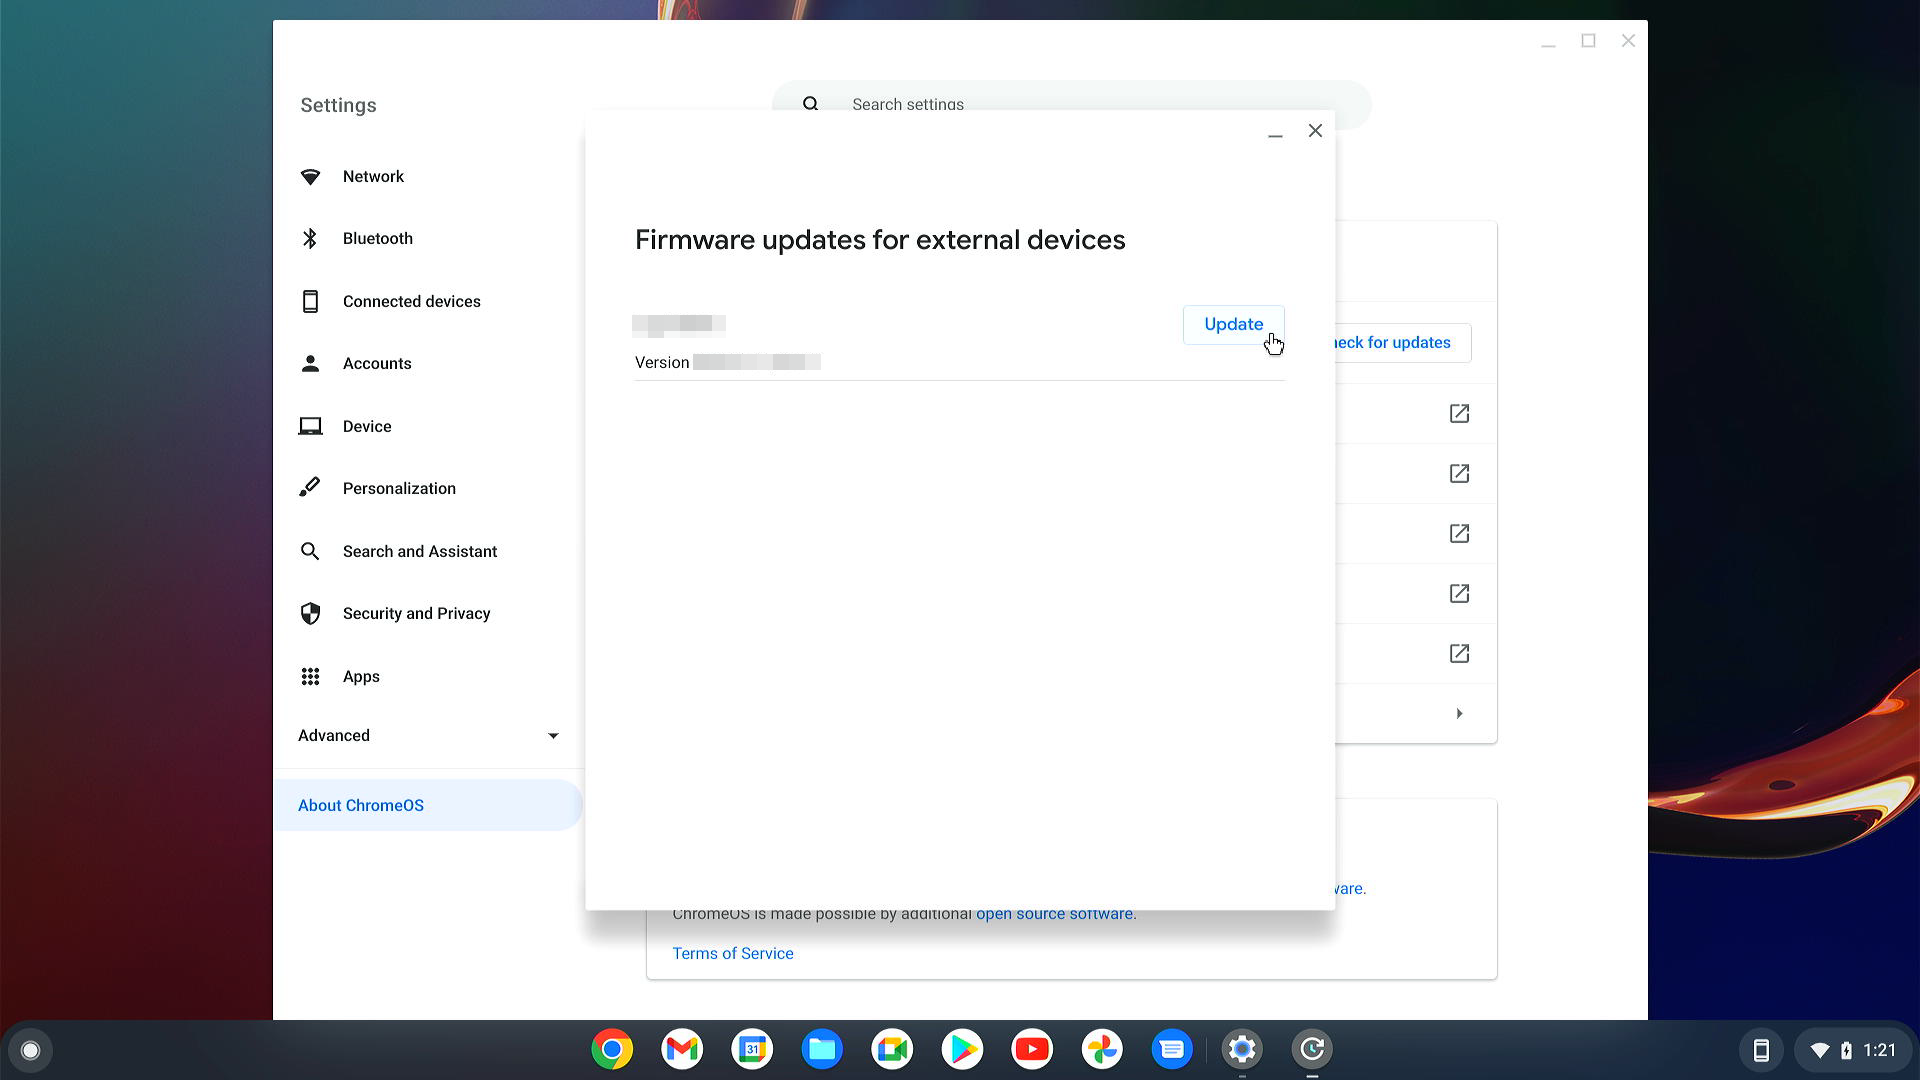 _images/chromeos-settings-available-update.png